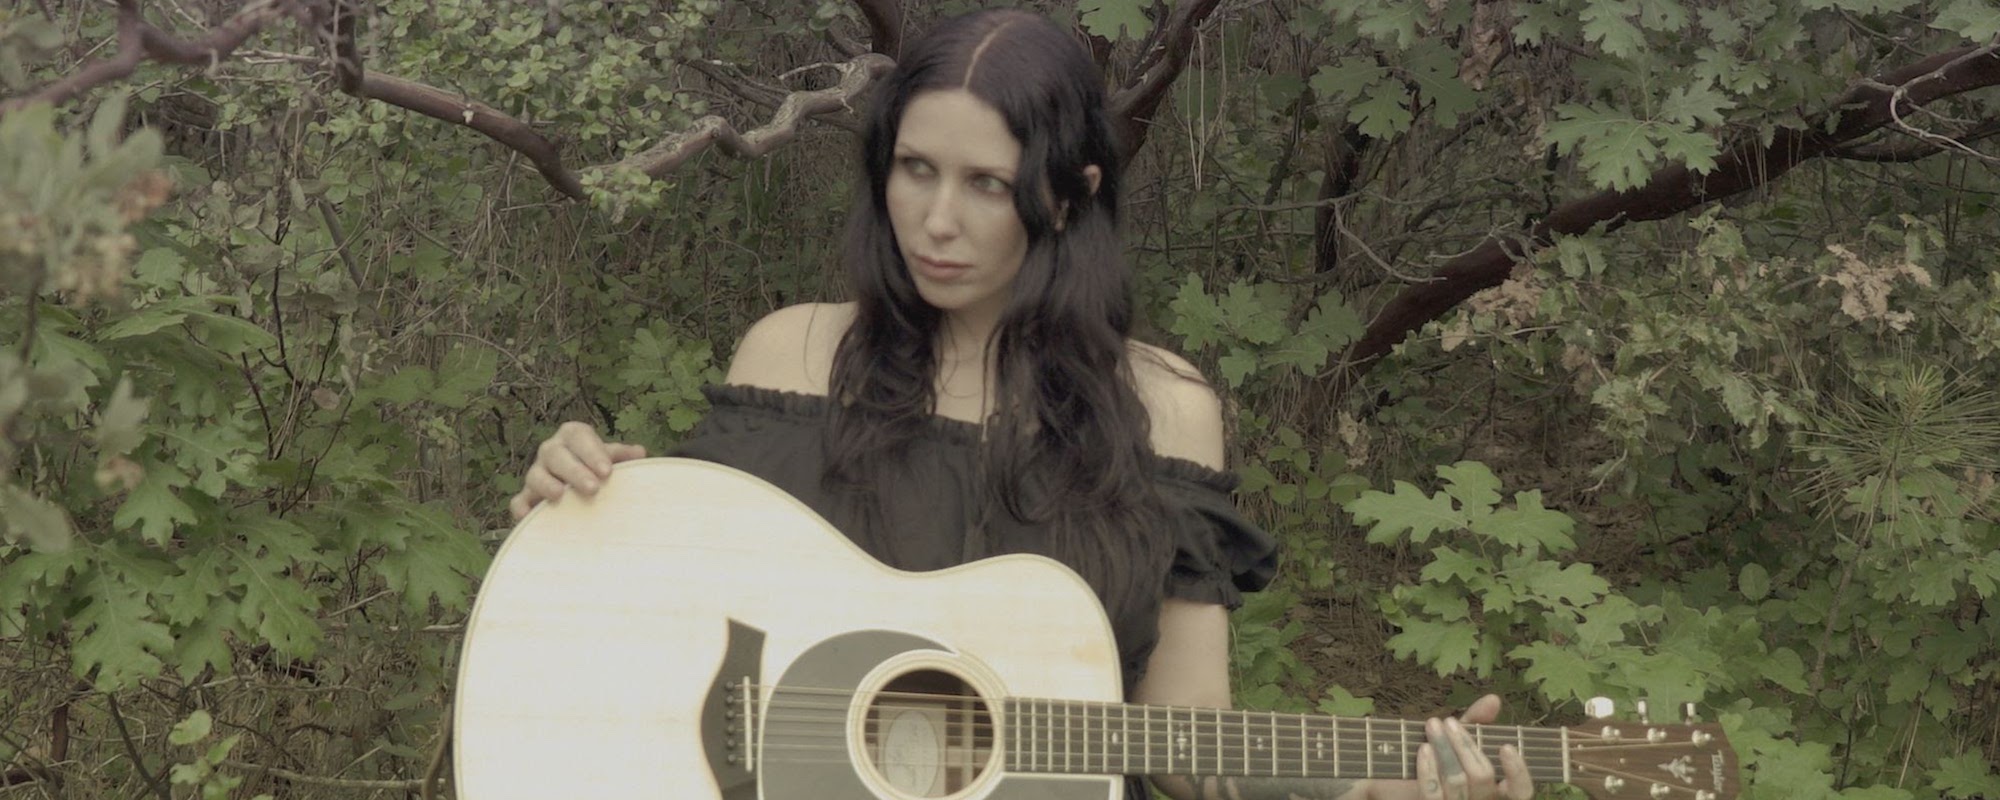 Chelsea Wolfe Covers Joni Mitchell’s “Woodstock,” Releases “Green Altar” and Tour Documentary